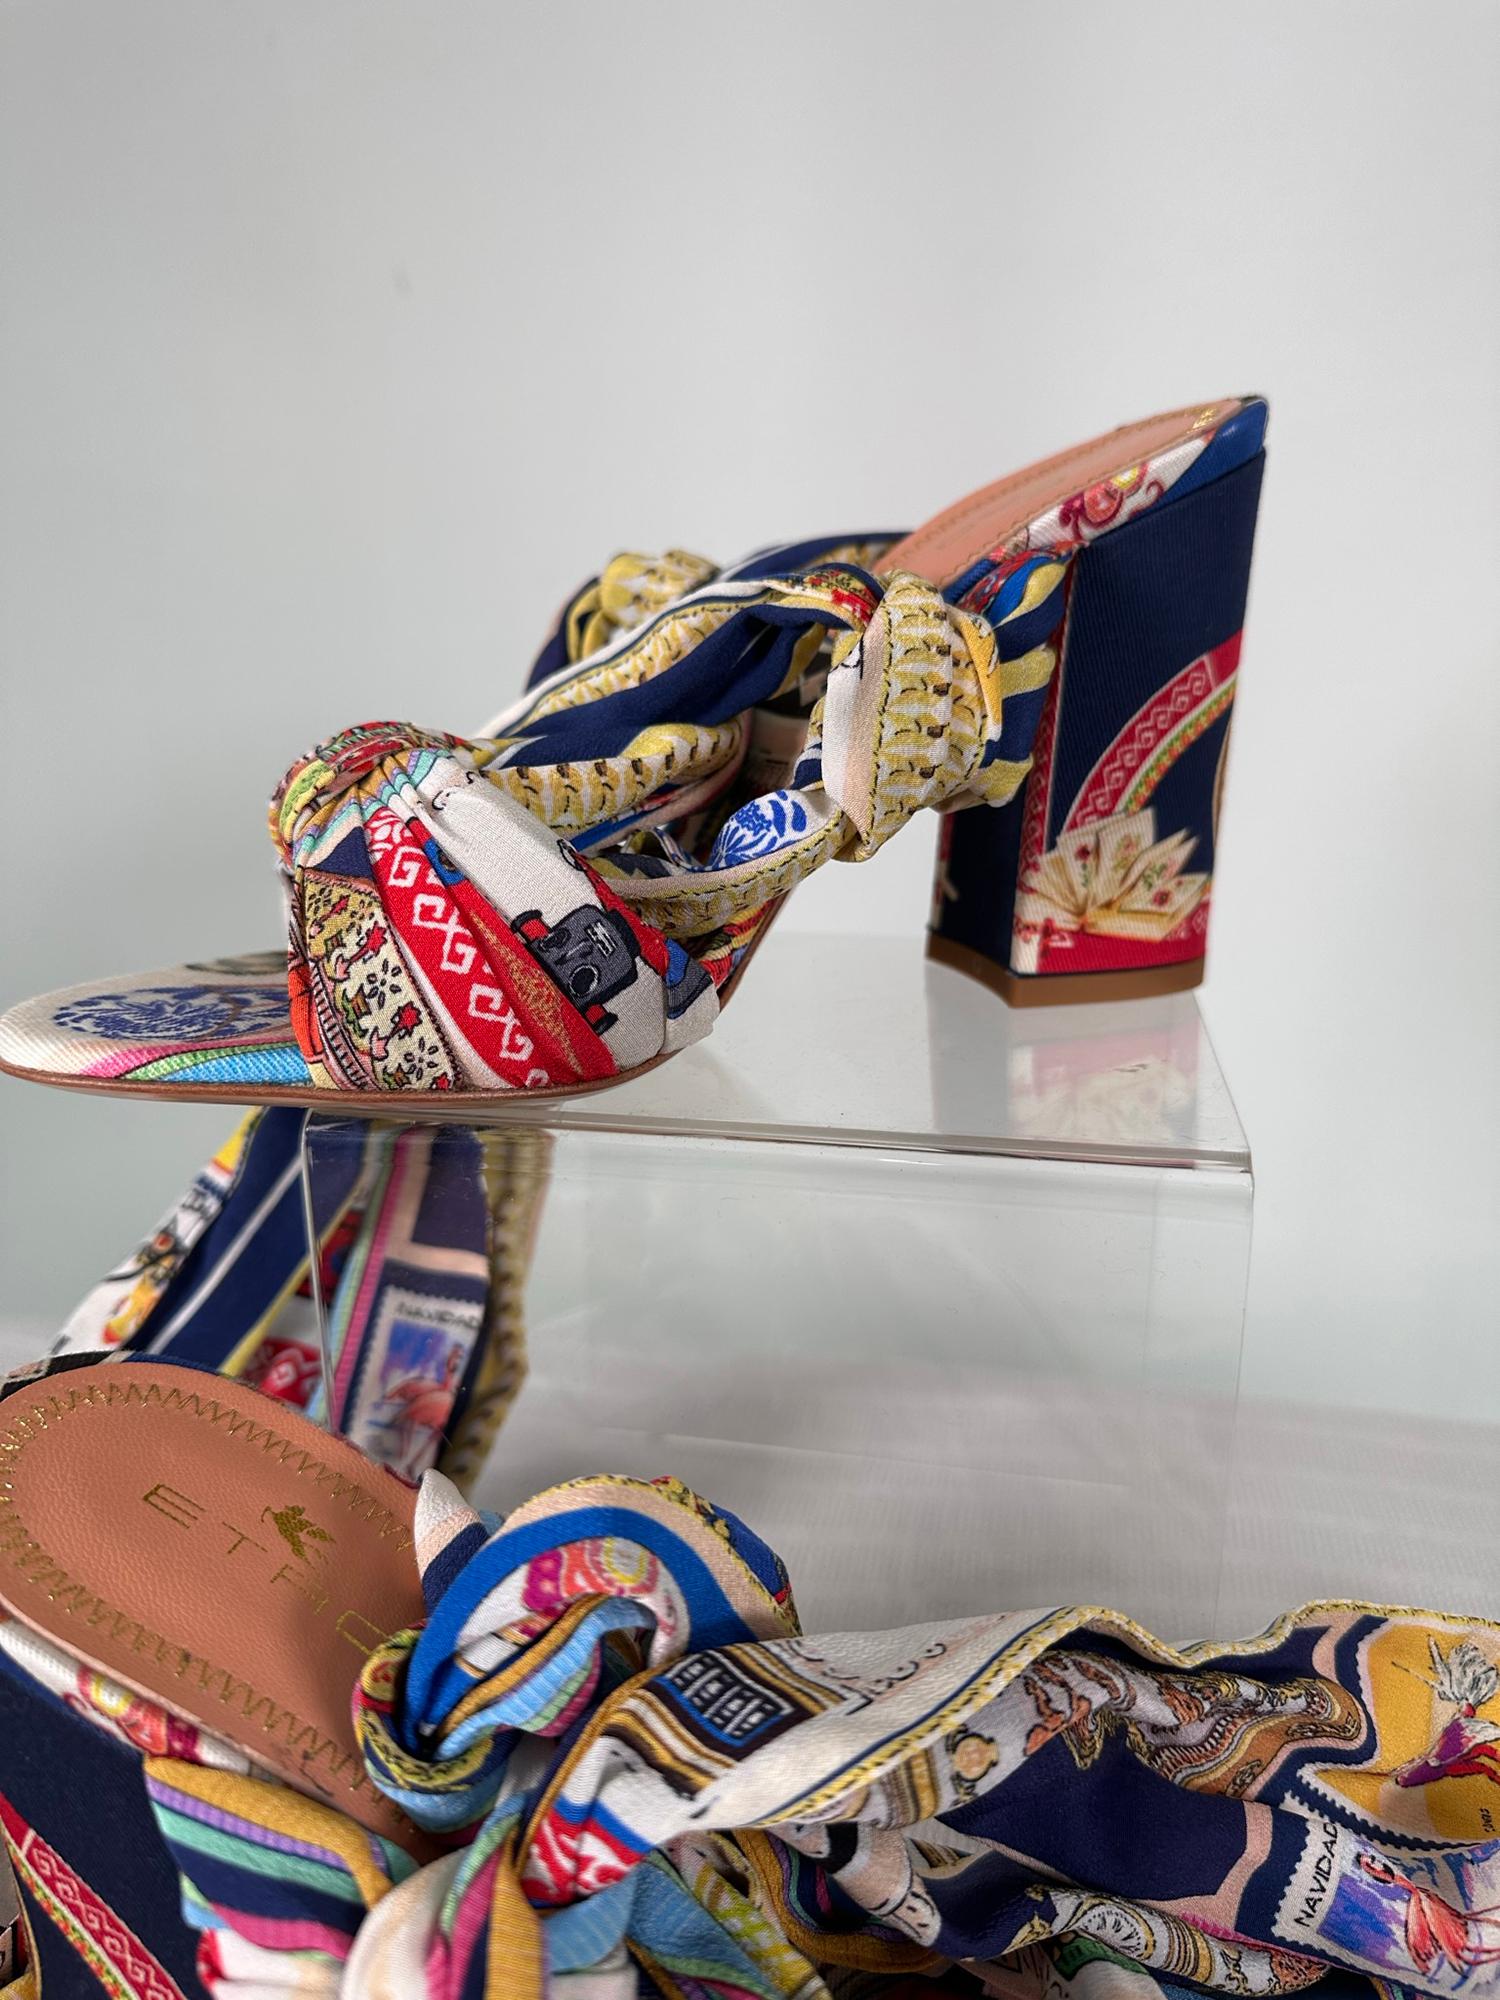 Etro chunky fabric covered heel sandals with brightly printed crepe fabric straps and long ties to tie at the ankles. The foot bed is covered in fabric. Leather soles. Marked size 37. Unworn, with protector bag & box. 